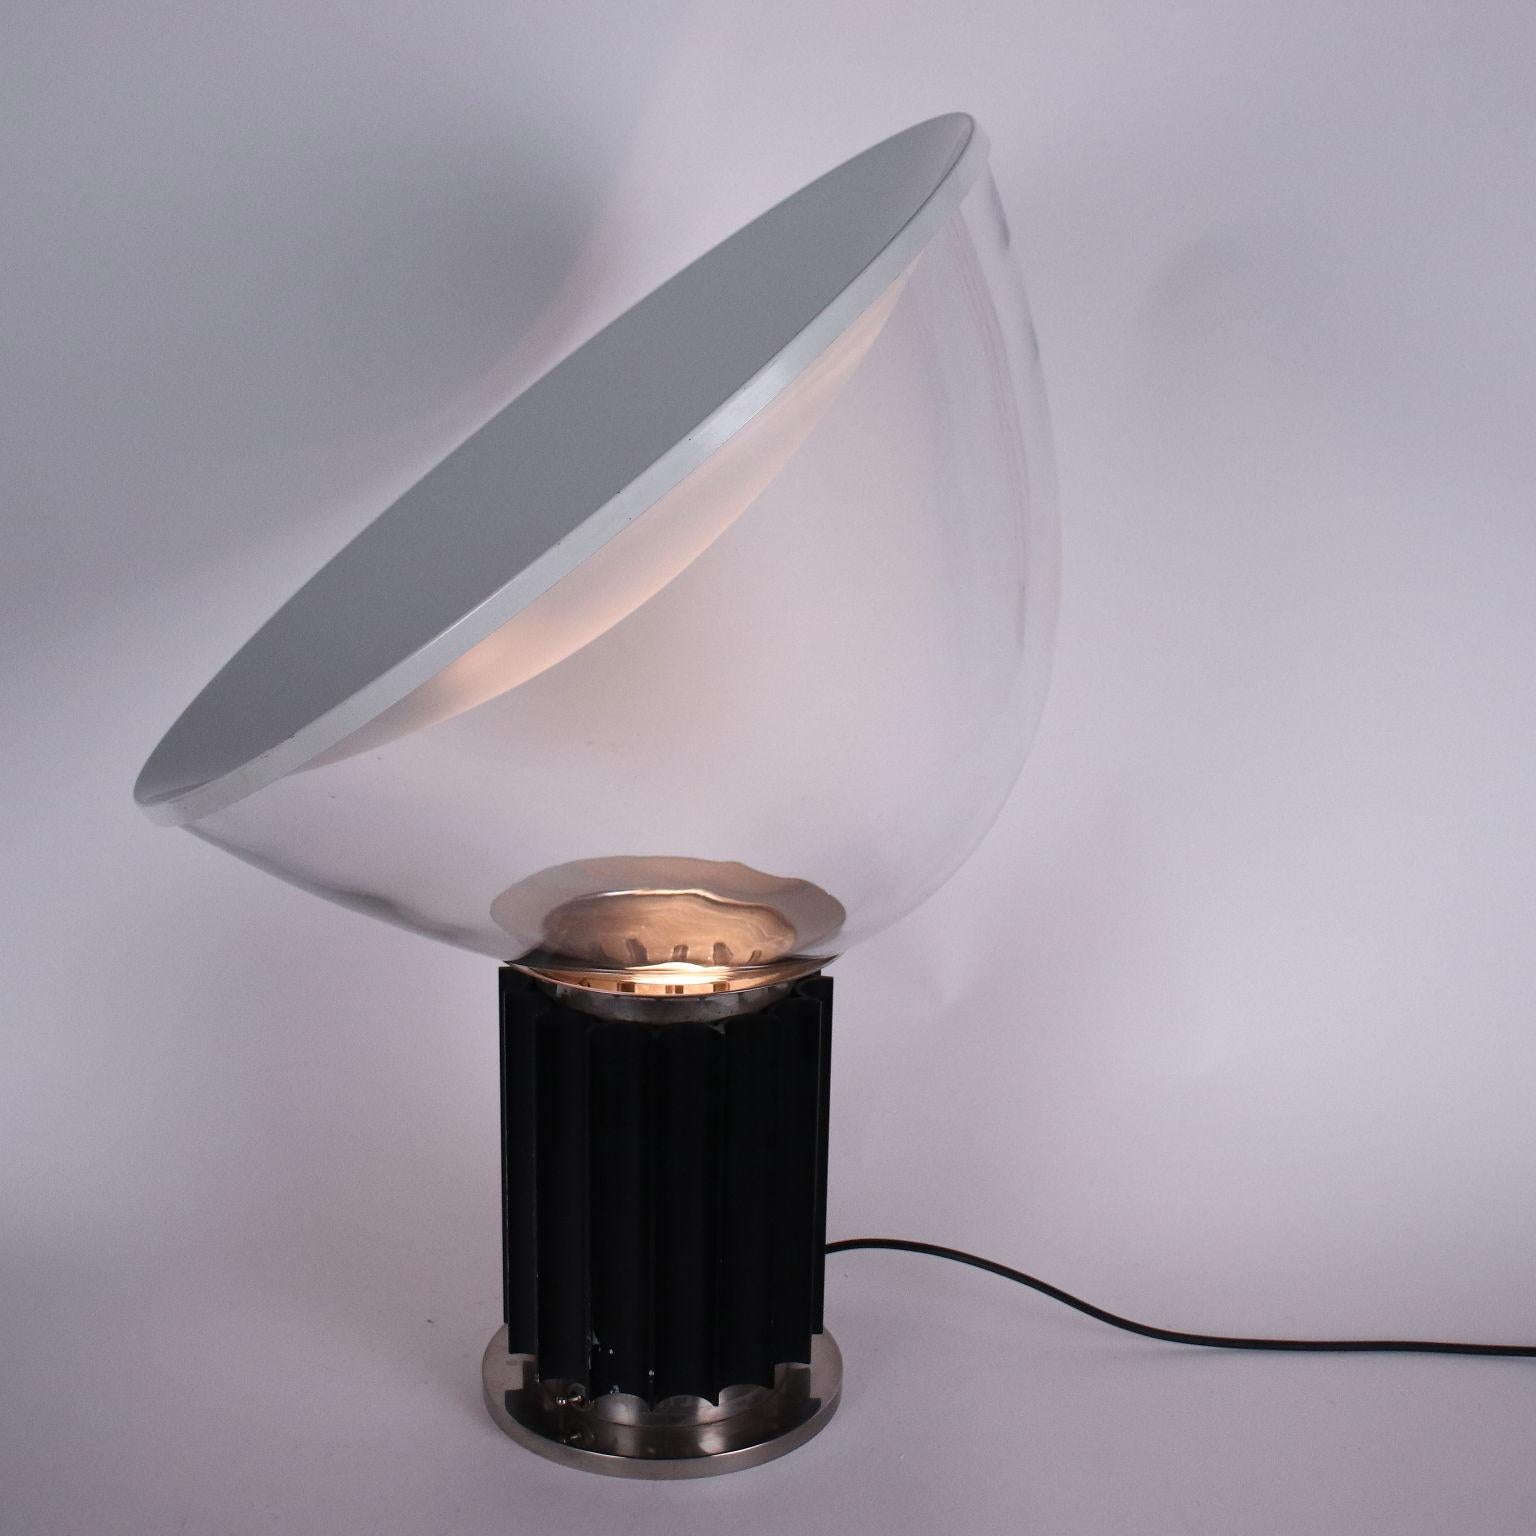 Mid-Century Modern Taccia Lamp by Achille and Pier Giacomo Castiglioni for Flos 1960s